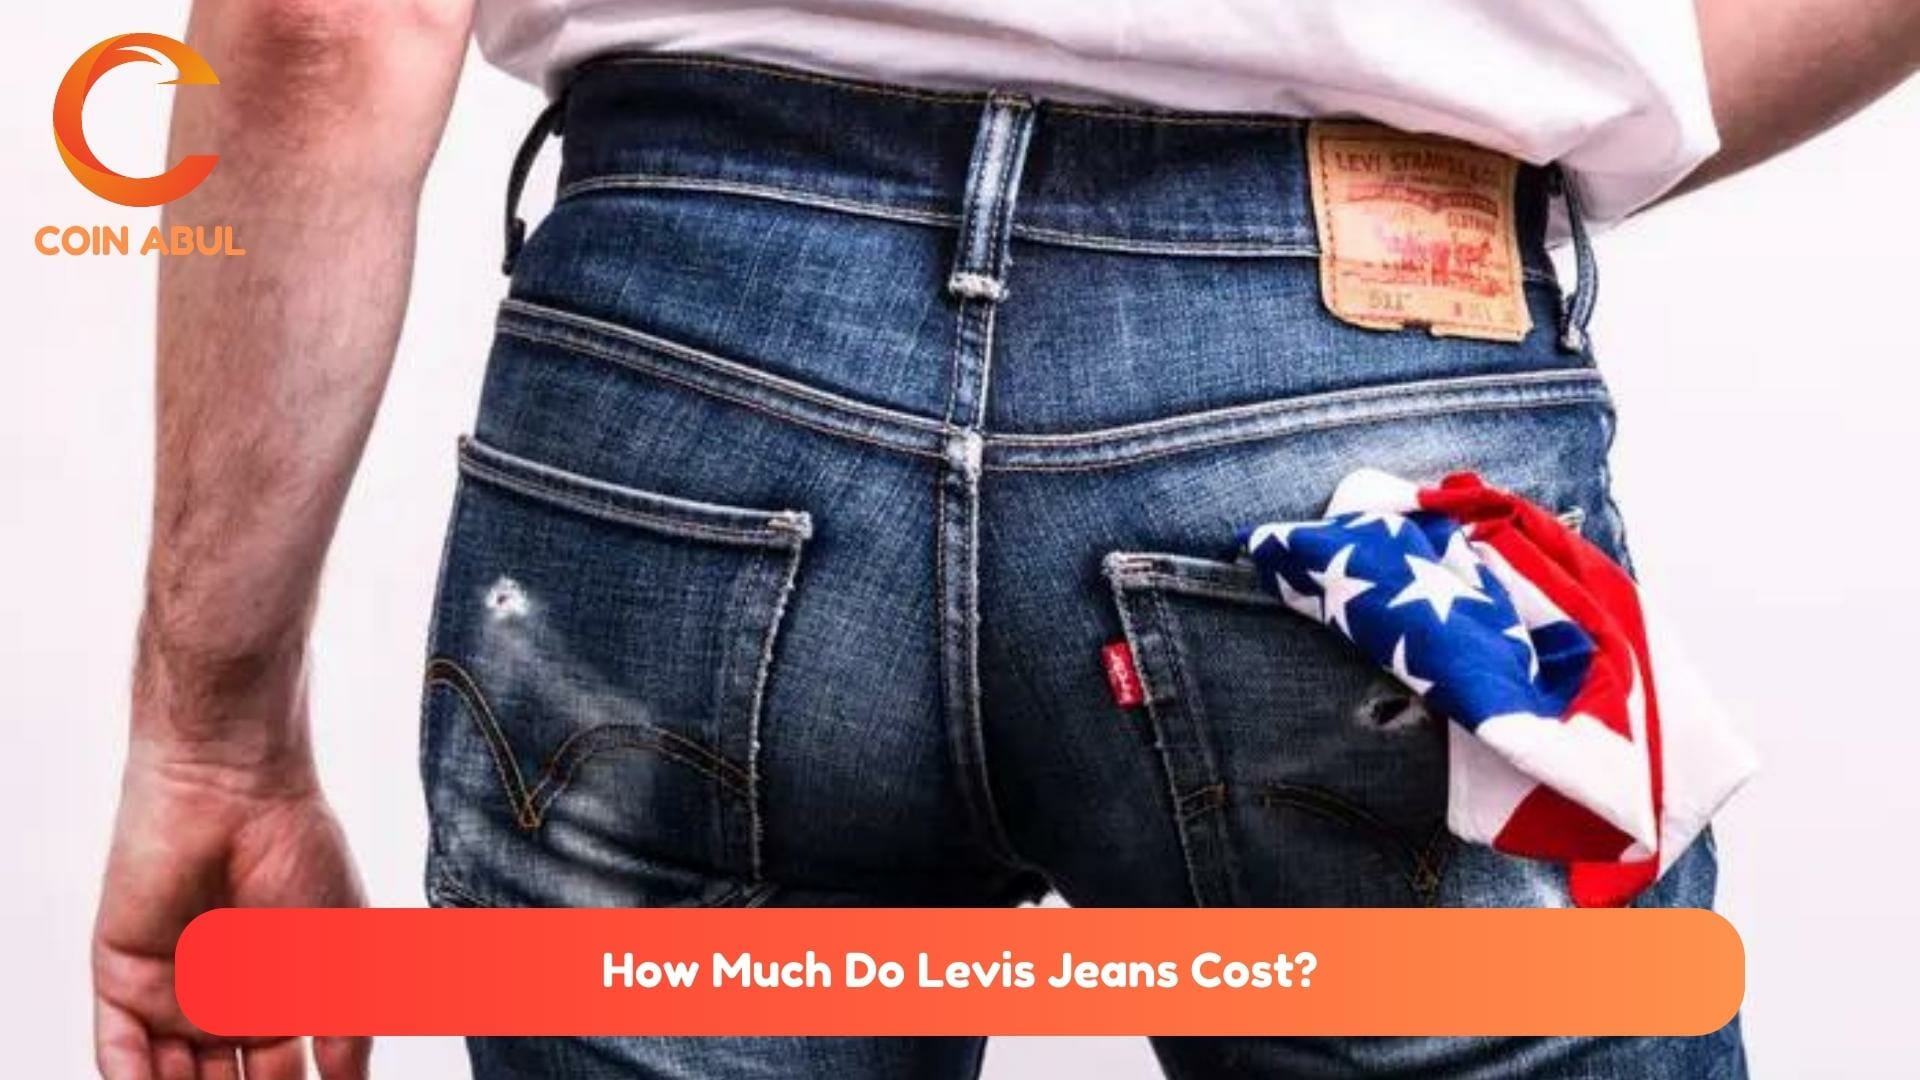 How Much Do Levis Jeans Cost